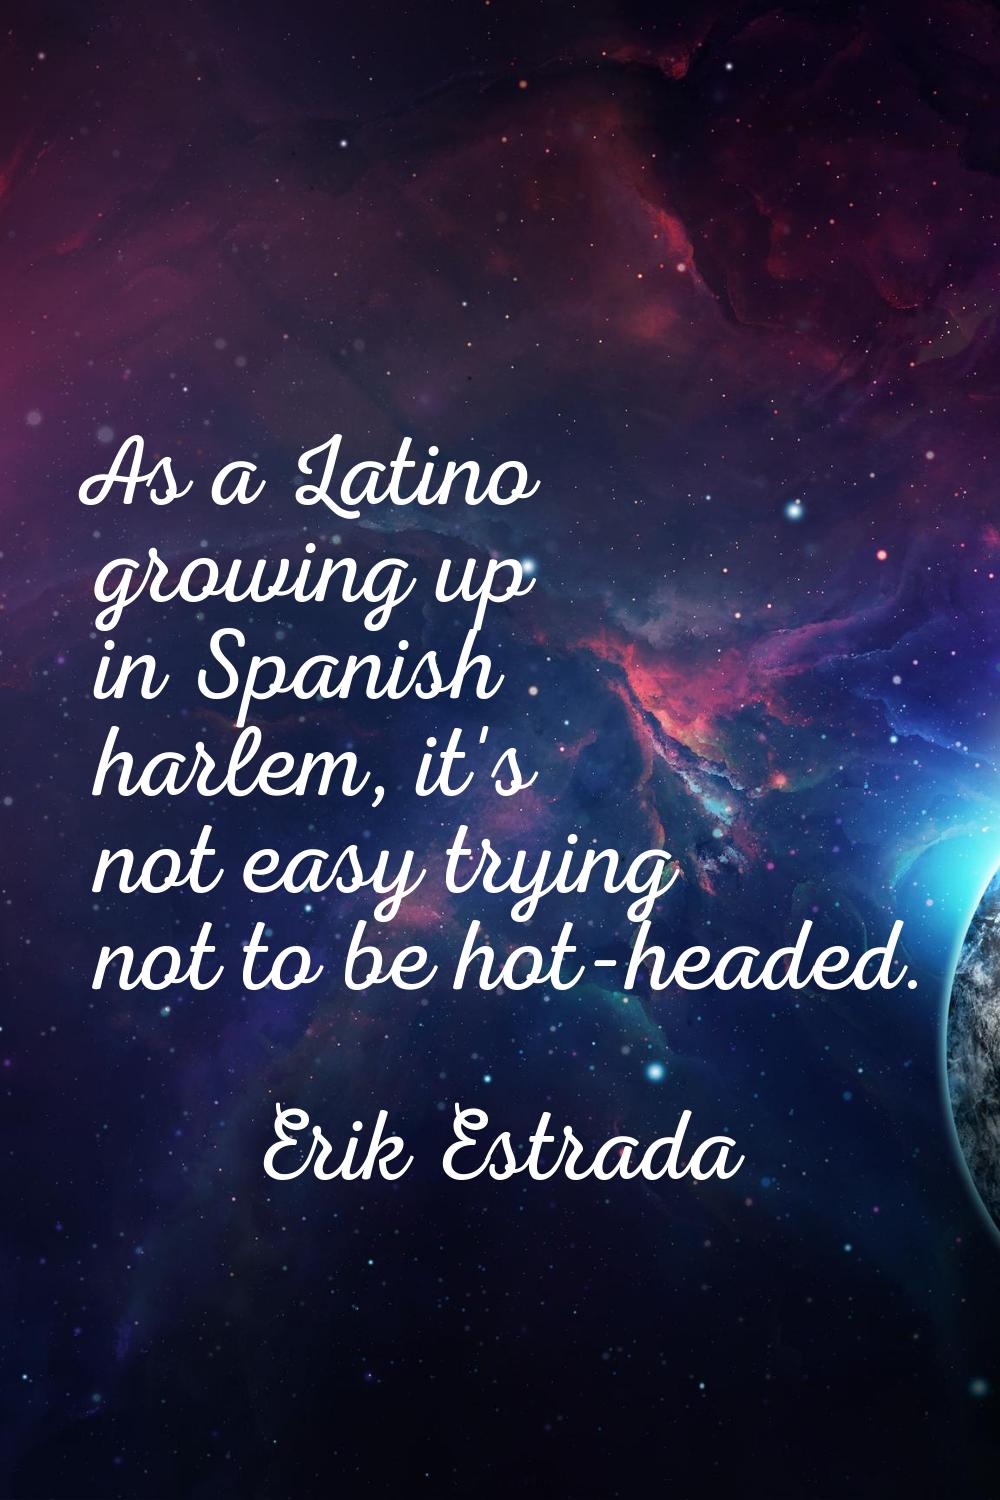 As a Latino growing up in Spanish harlem, it's not easy trying not to be hot-headed.